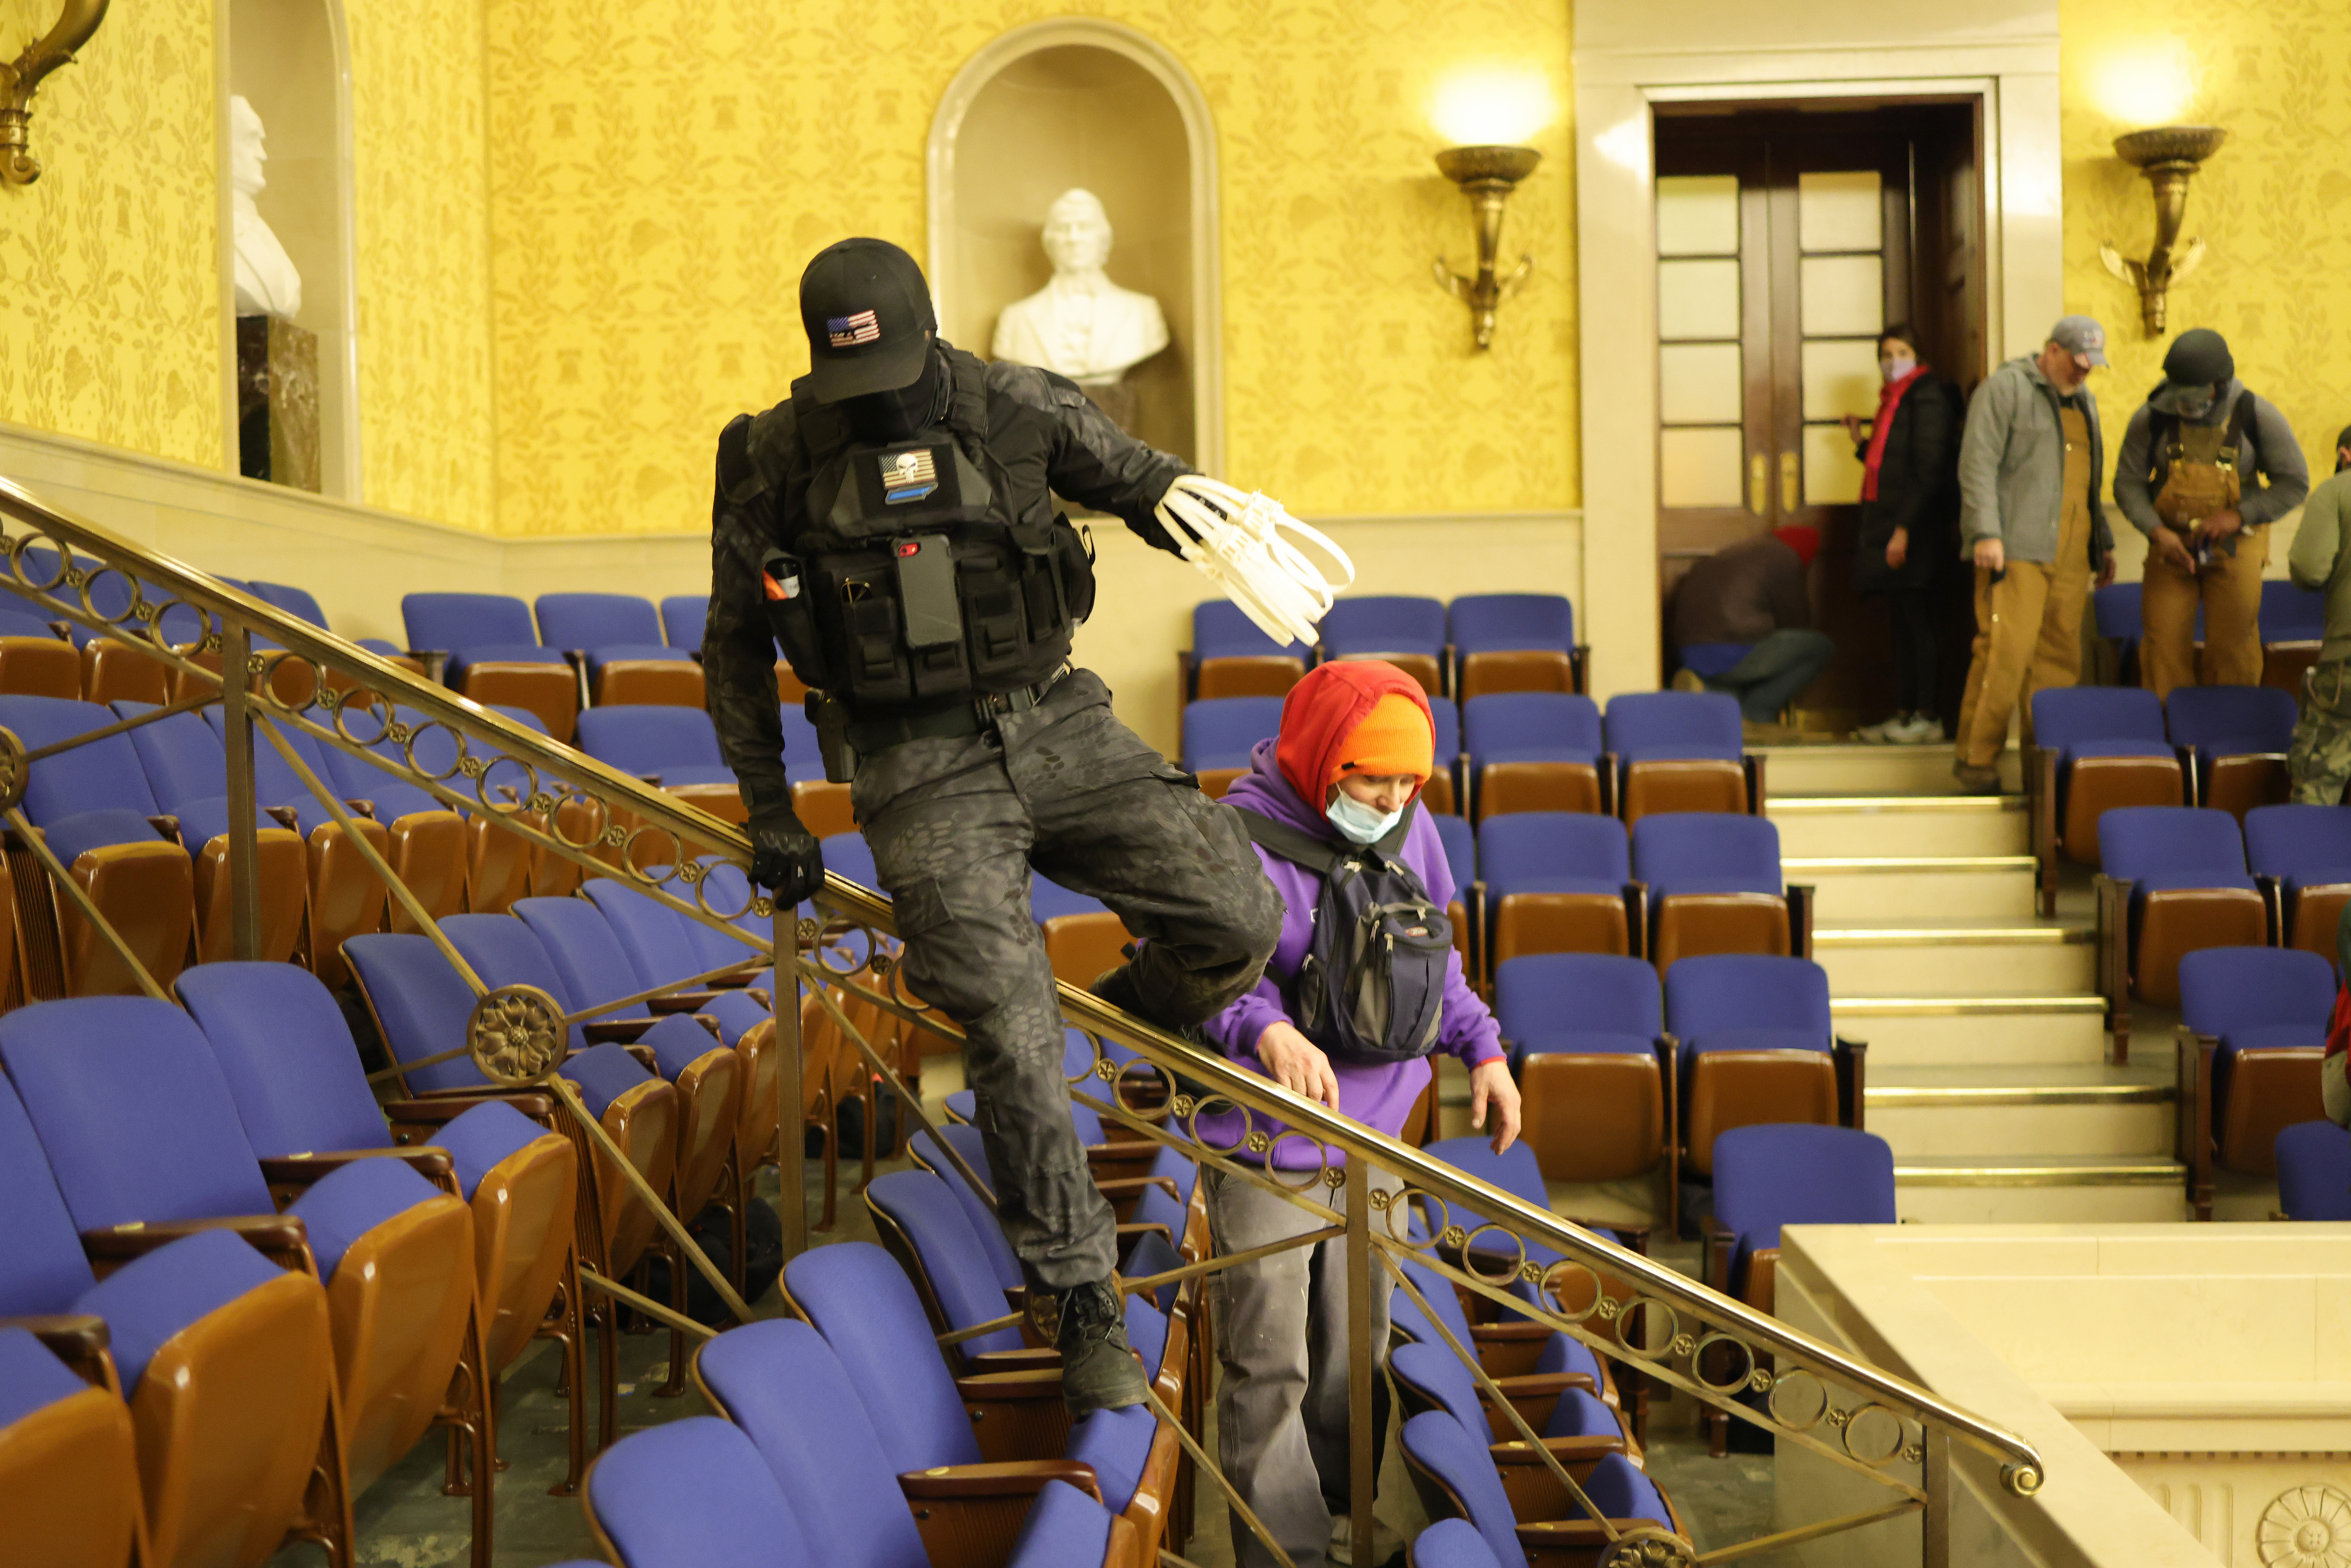 A protester carrying plastic zip-tie handcuffs is seen inside the Senate chamber, prompting theories some who stormed the building were ready and willing to capture hostages.